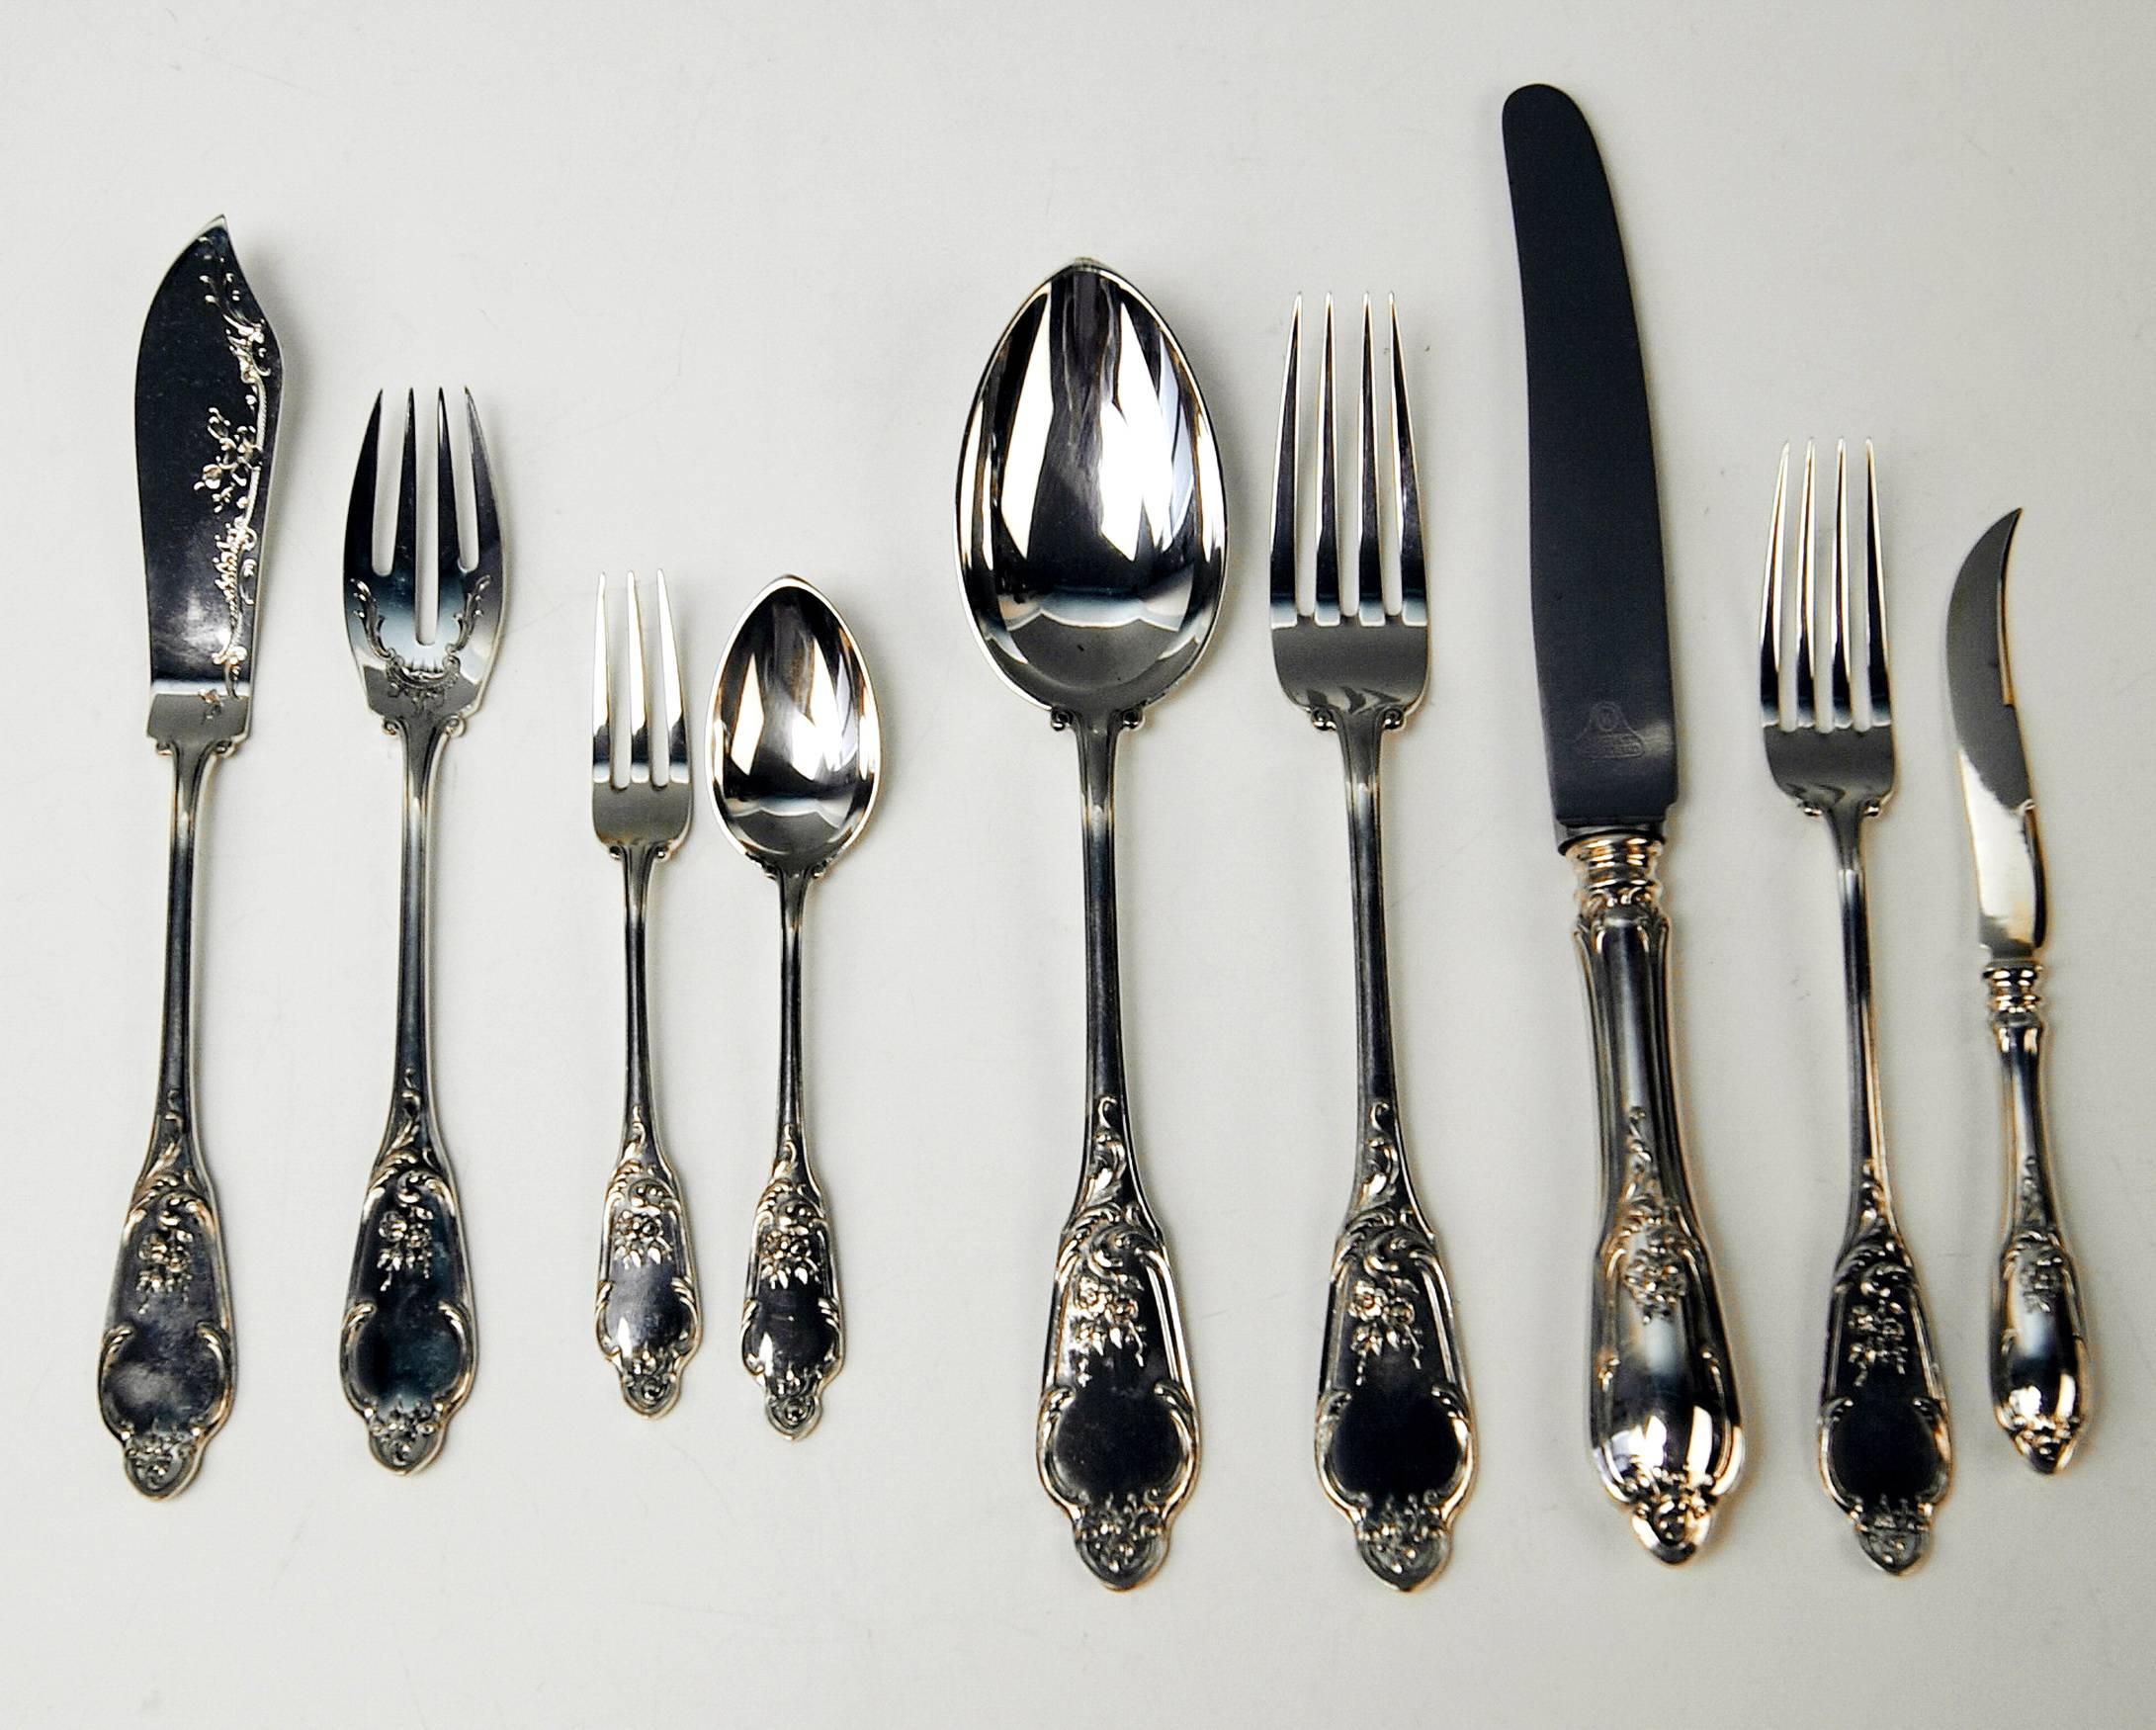 Gorgeous German cutlery service / flatware / dinnerware consisting of 108 pieces. Most elegant design = ROCOCO STYLE hallmarked by SILVER MANUFACTORY OF SAUERLAND BROTHERS (Berlin / Germany).

Chest:
Additionally, this cutlery service is kept in